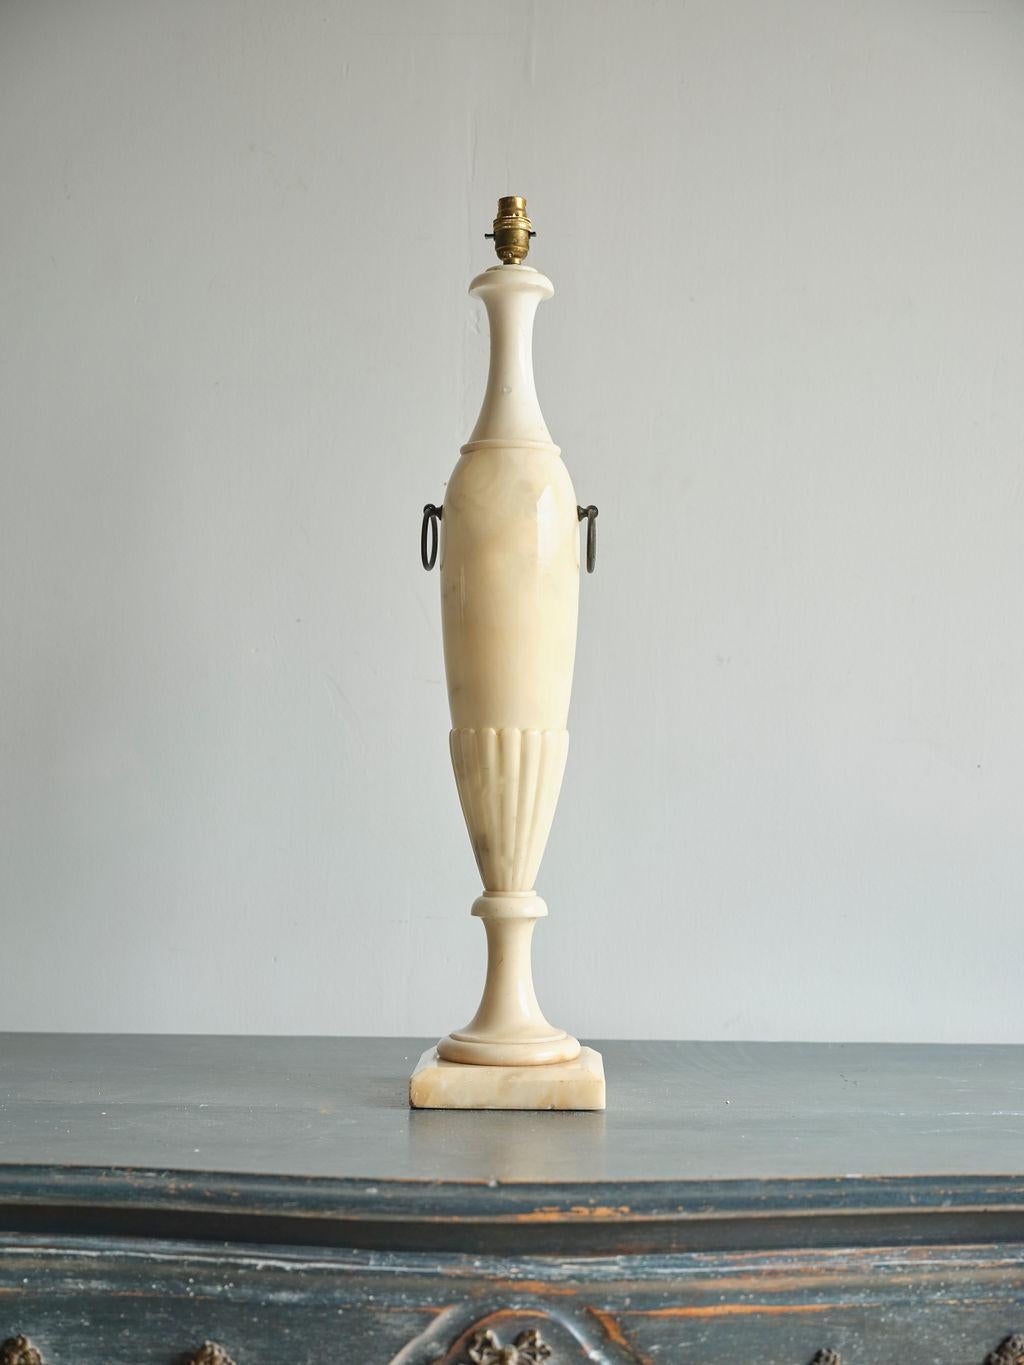 This is a lovely 19th century alabaster lamp. It is a creamy color and has a unique shape. It is very sturdy. This lamp does not come with a lamp shade. It has two decorative brass rings on either side and stands on a square base. This lamp is